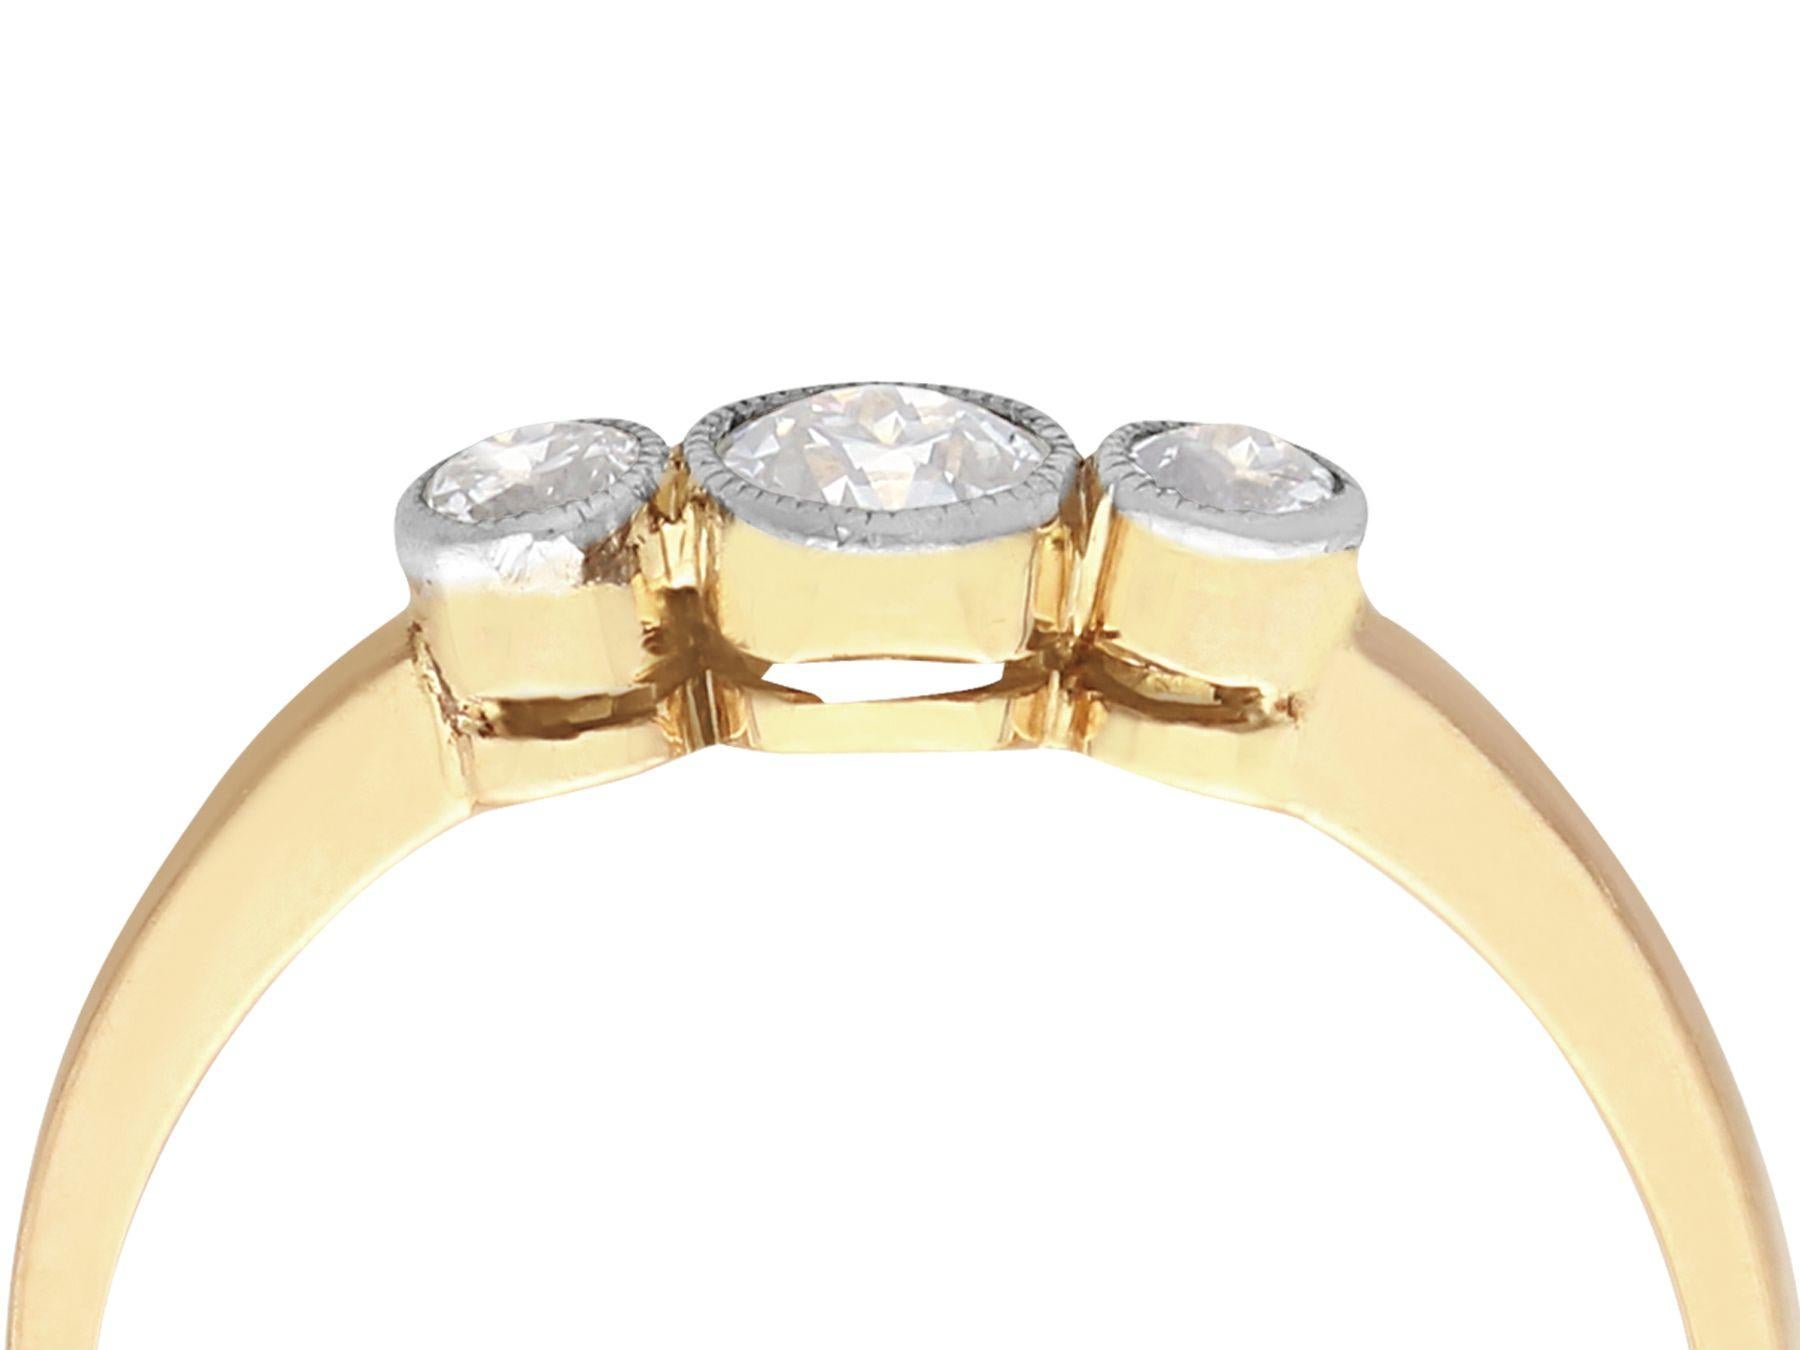 A fine and impressive antique 0.40 carat diamond and 18 karat yellow gold, 18 karat white gold set three stone/trilogy ring; part of our diverse antique diamond jewelry and estate jewelry collections.

This impressive antique three stone diamond